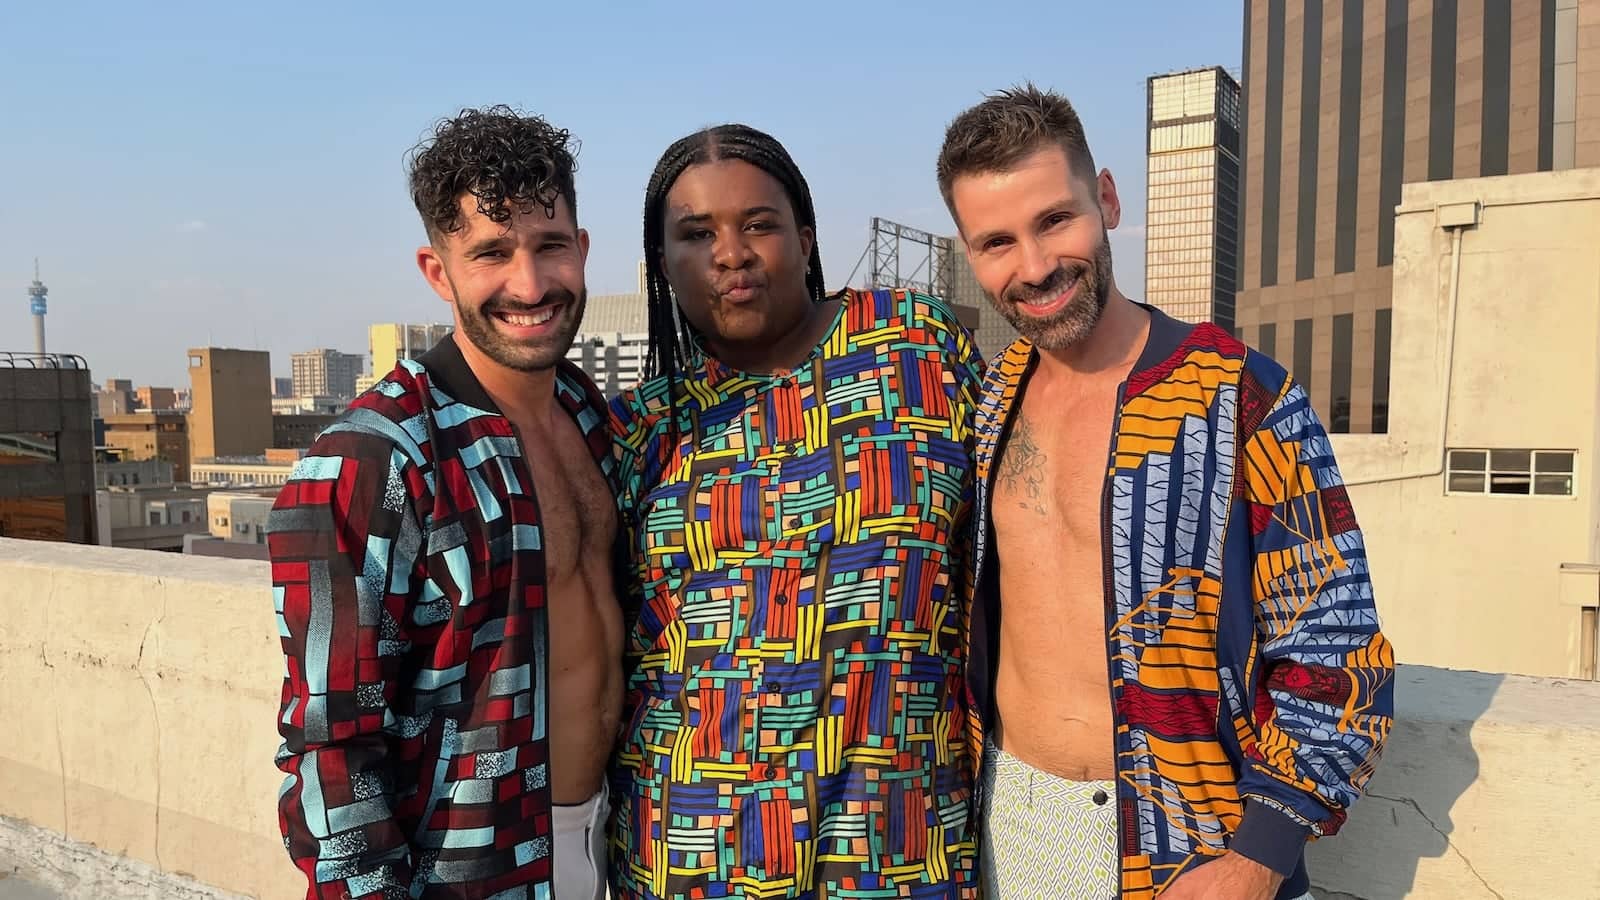 Sebo posing with gay couple Stefan and Seby of Nomadic Boys in Downtown Johannesburg.